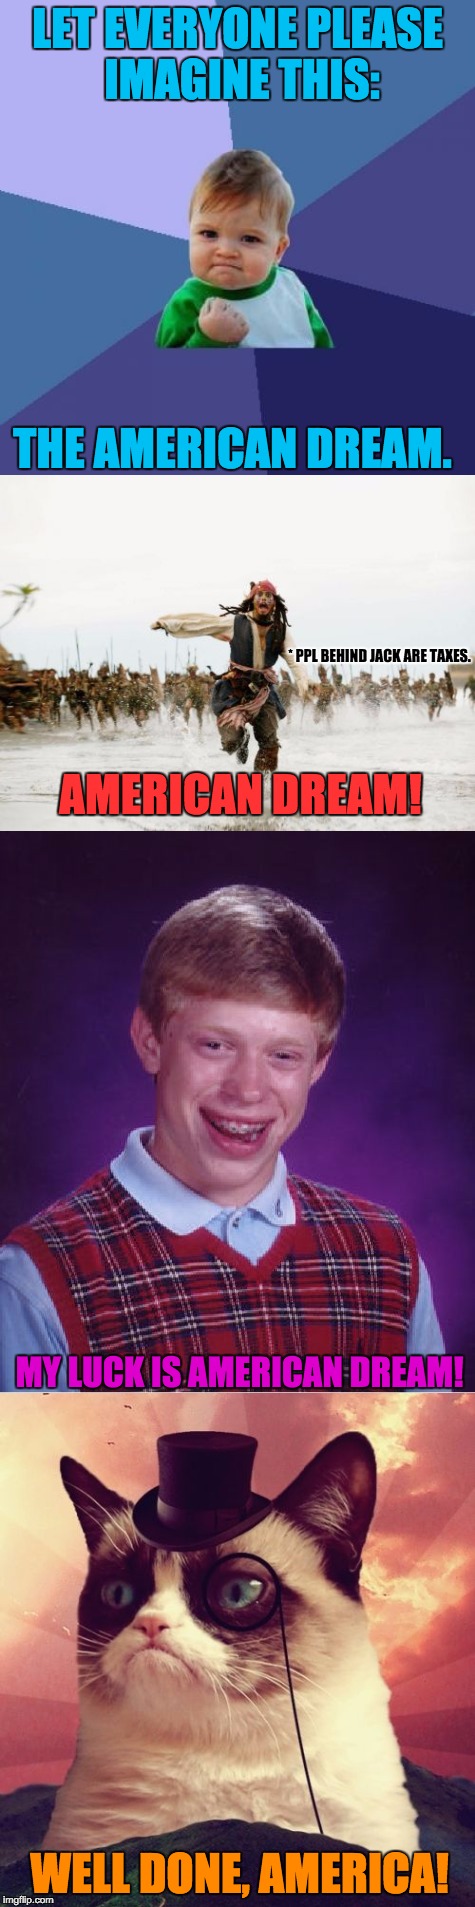 AMERICAN DREAM! | LET EVERYONE PLEASE IMAGINE THIS:; THE AMERICAN DREAM. * PPL BEHIND JACK ARE TAXES. AMERICAN DREAM! MY LUCK IS AMERICAN DREAM! WELL DONE, AMERICA! | image tagged in american dream | made w/ Imgflip meme maker